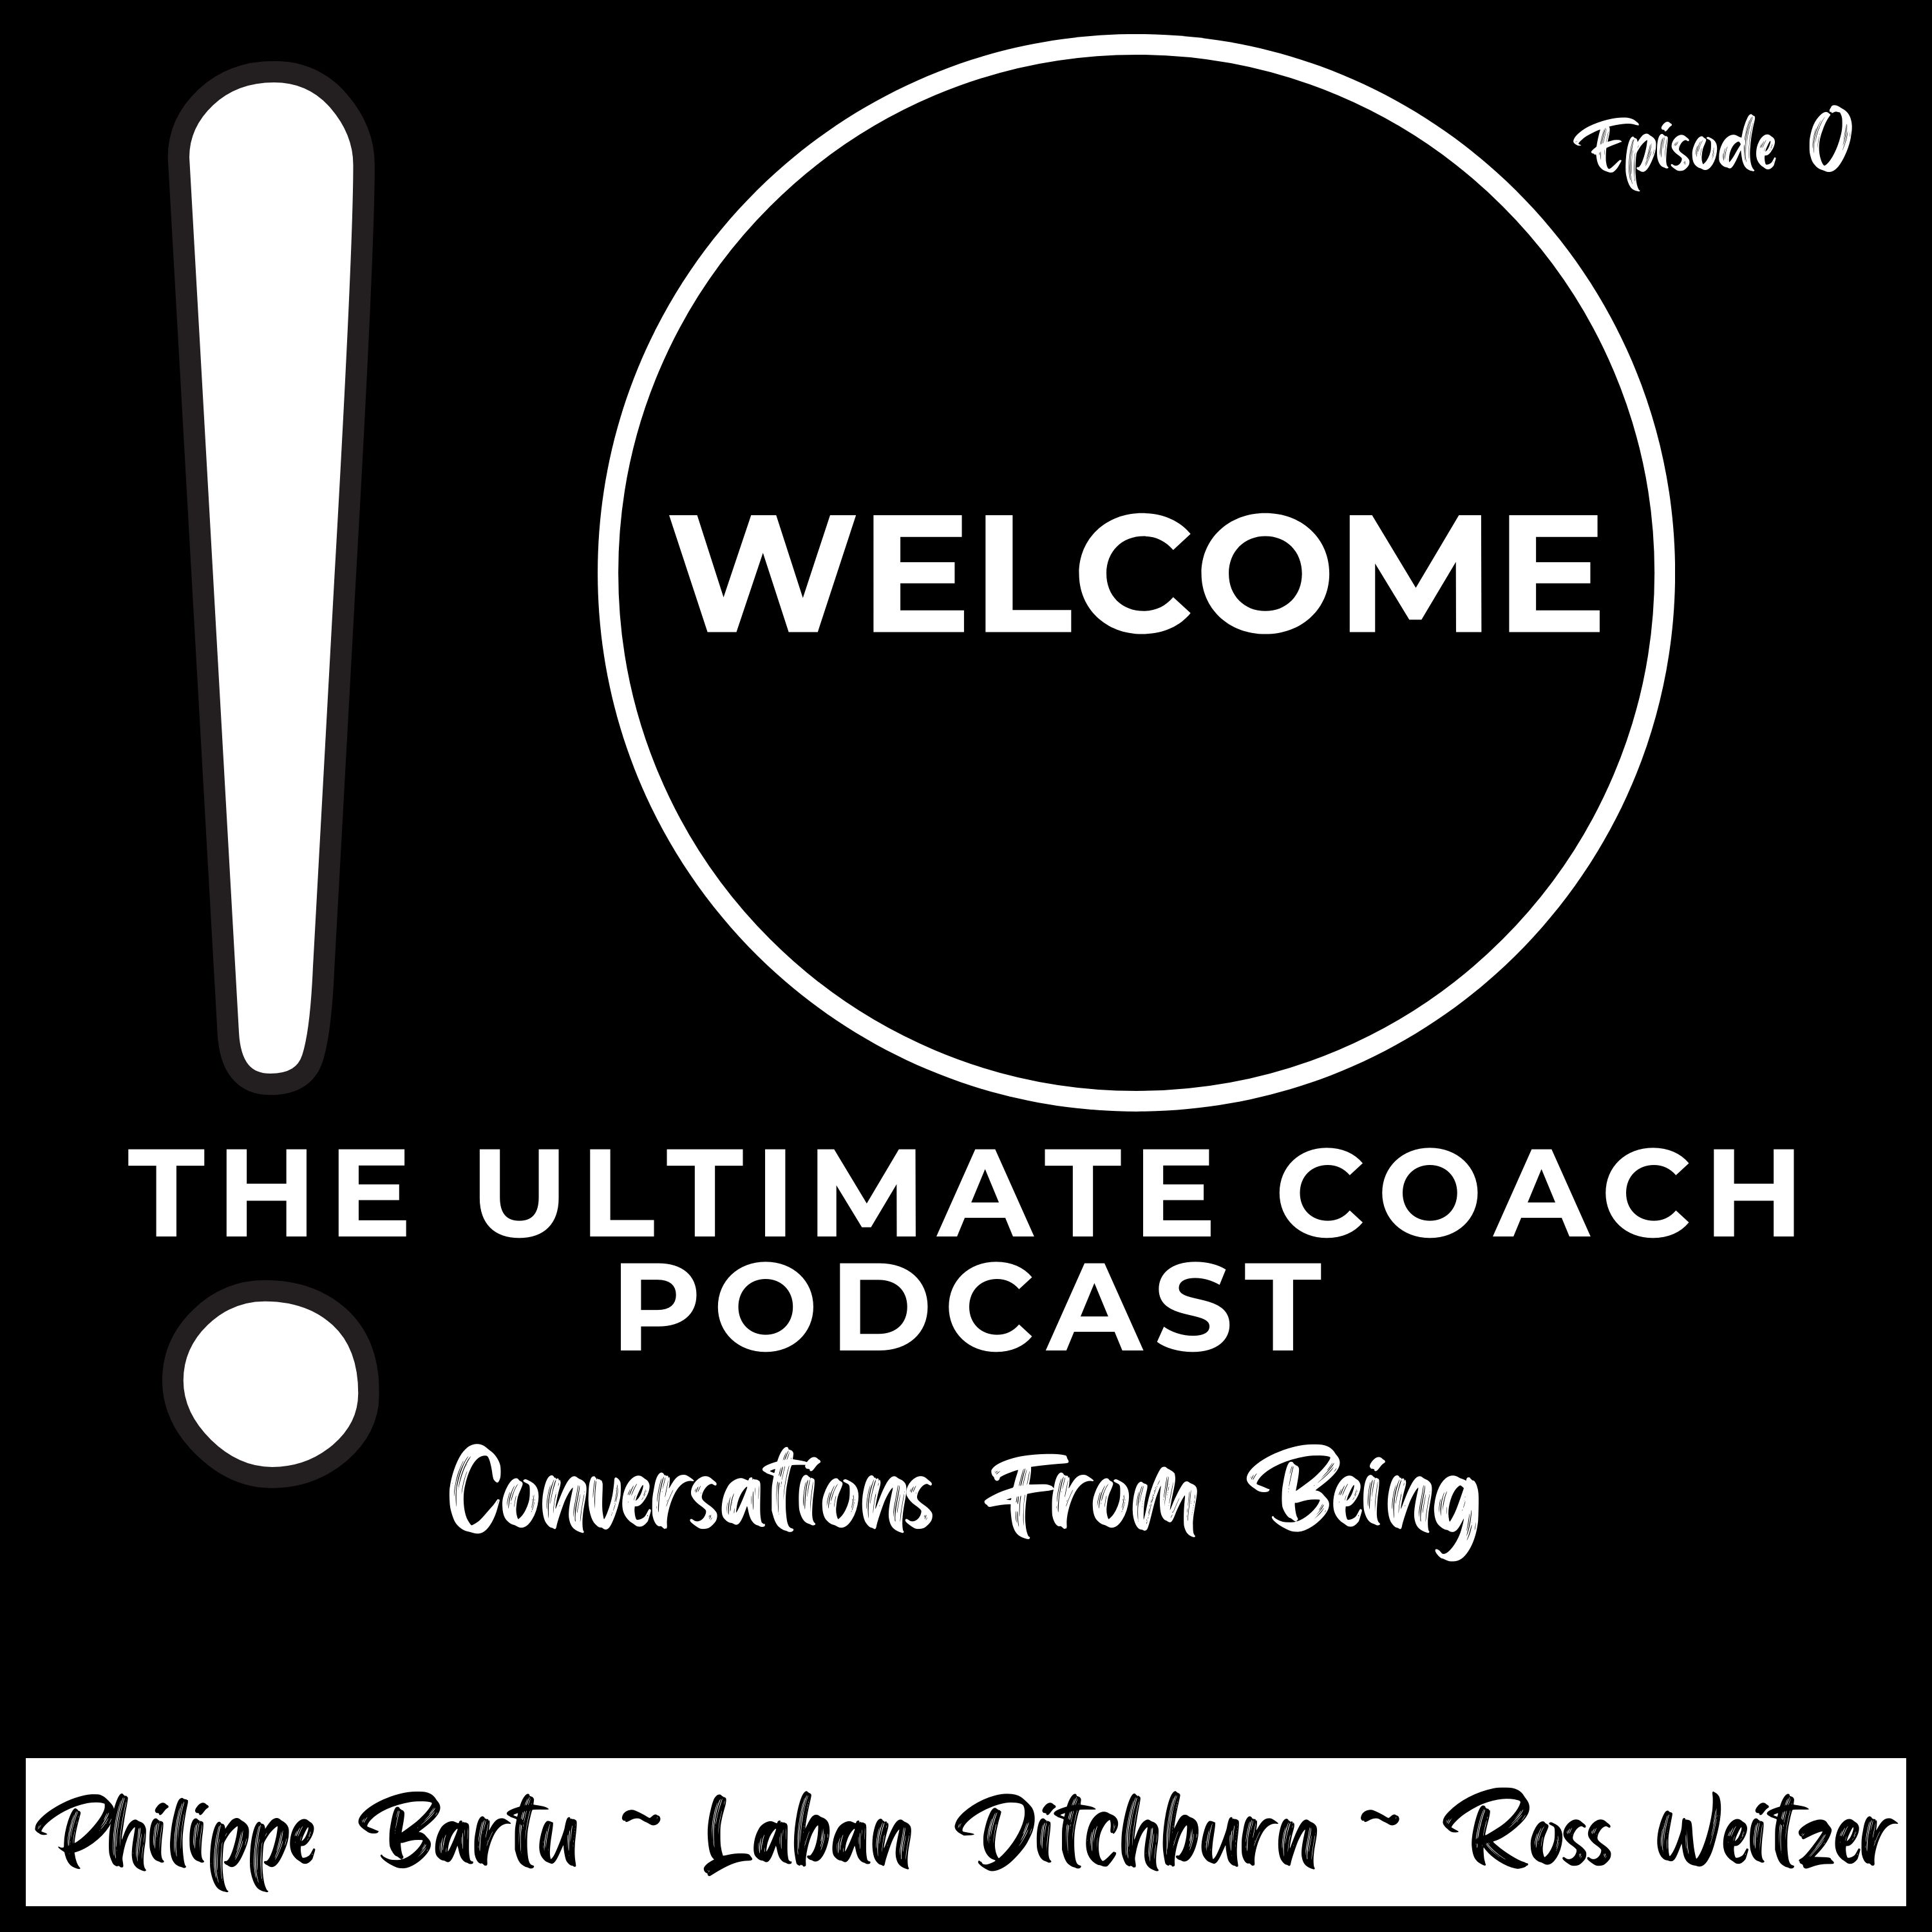 Welcome to The Ultimate Coach Podcast